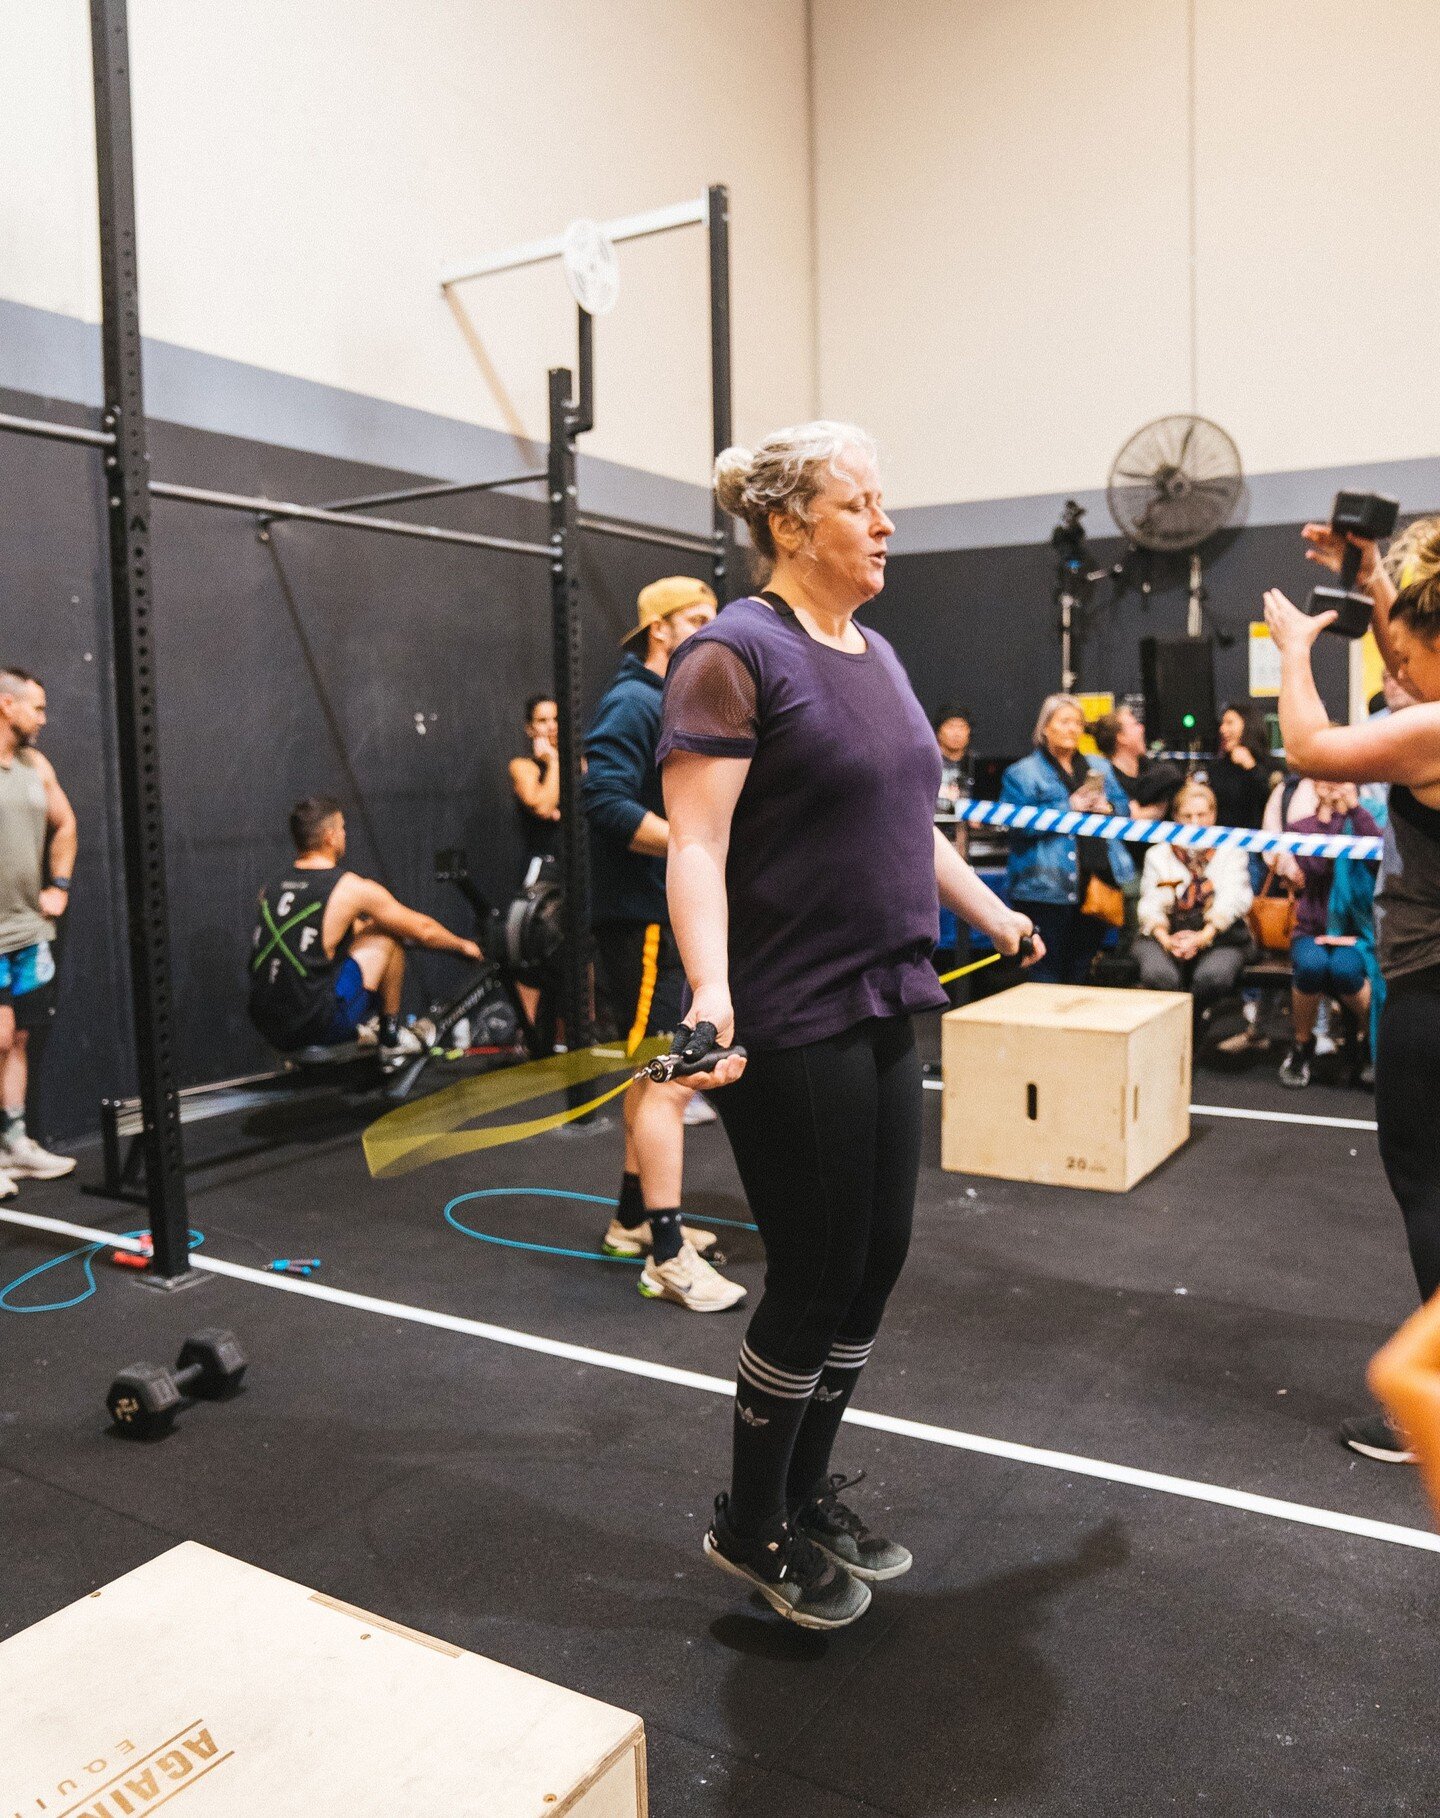 P H O T O S 

Here are the photos you&rsquo;ve all been waiting for! Such incredible moments captured by by @onsightfilms.tv 

Thank you Redge for these phenomenal shots!

📸: Access full album via link in bio

#crossfit2147invitational2022